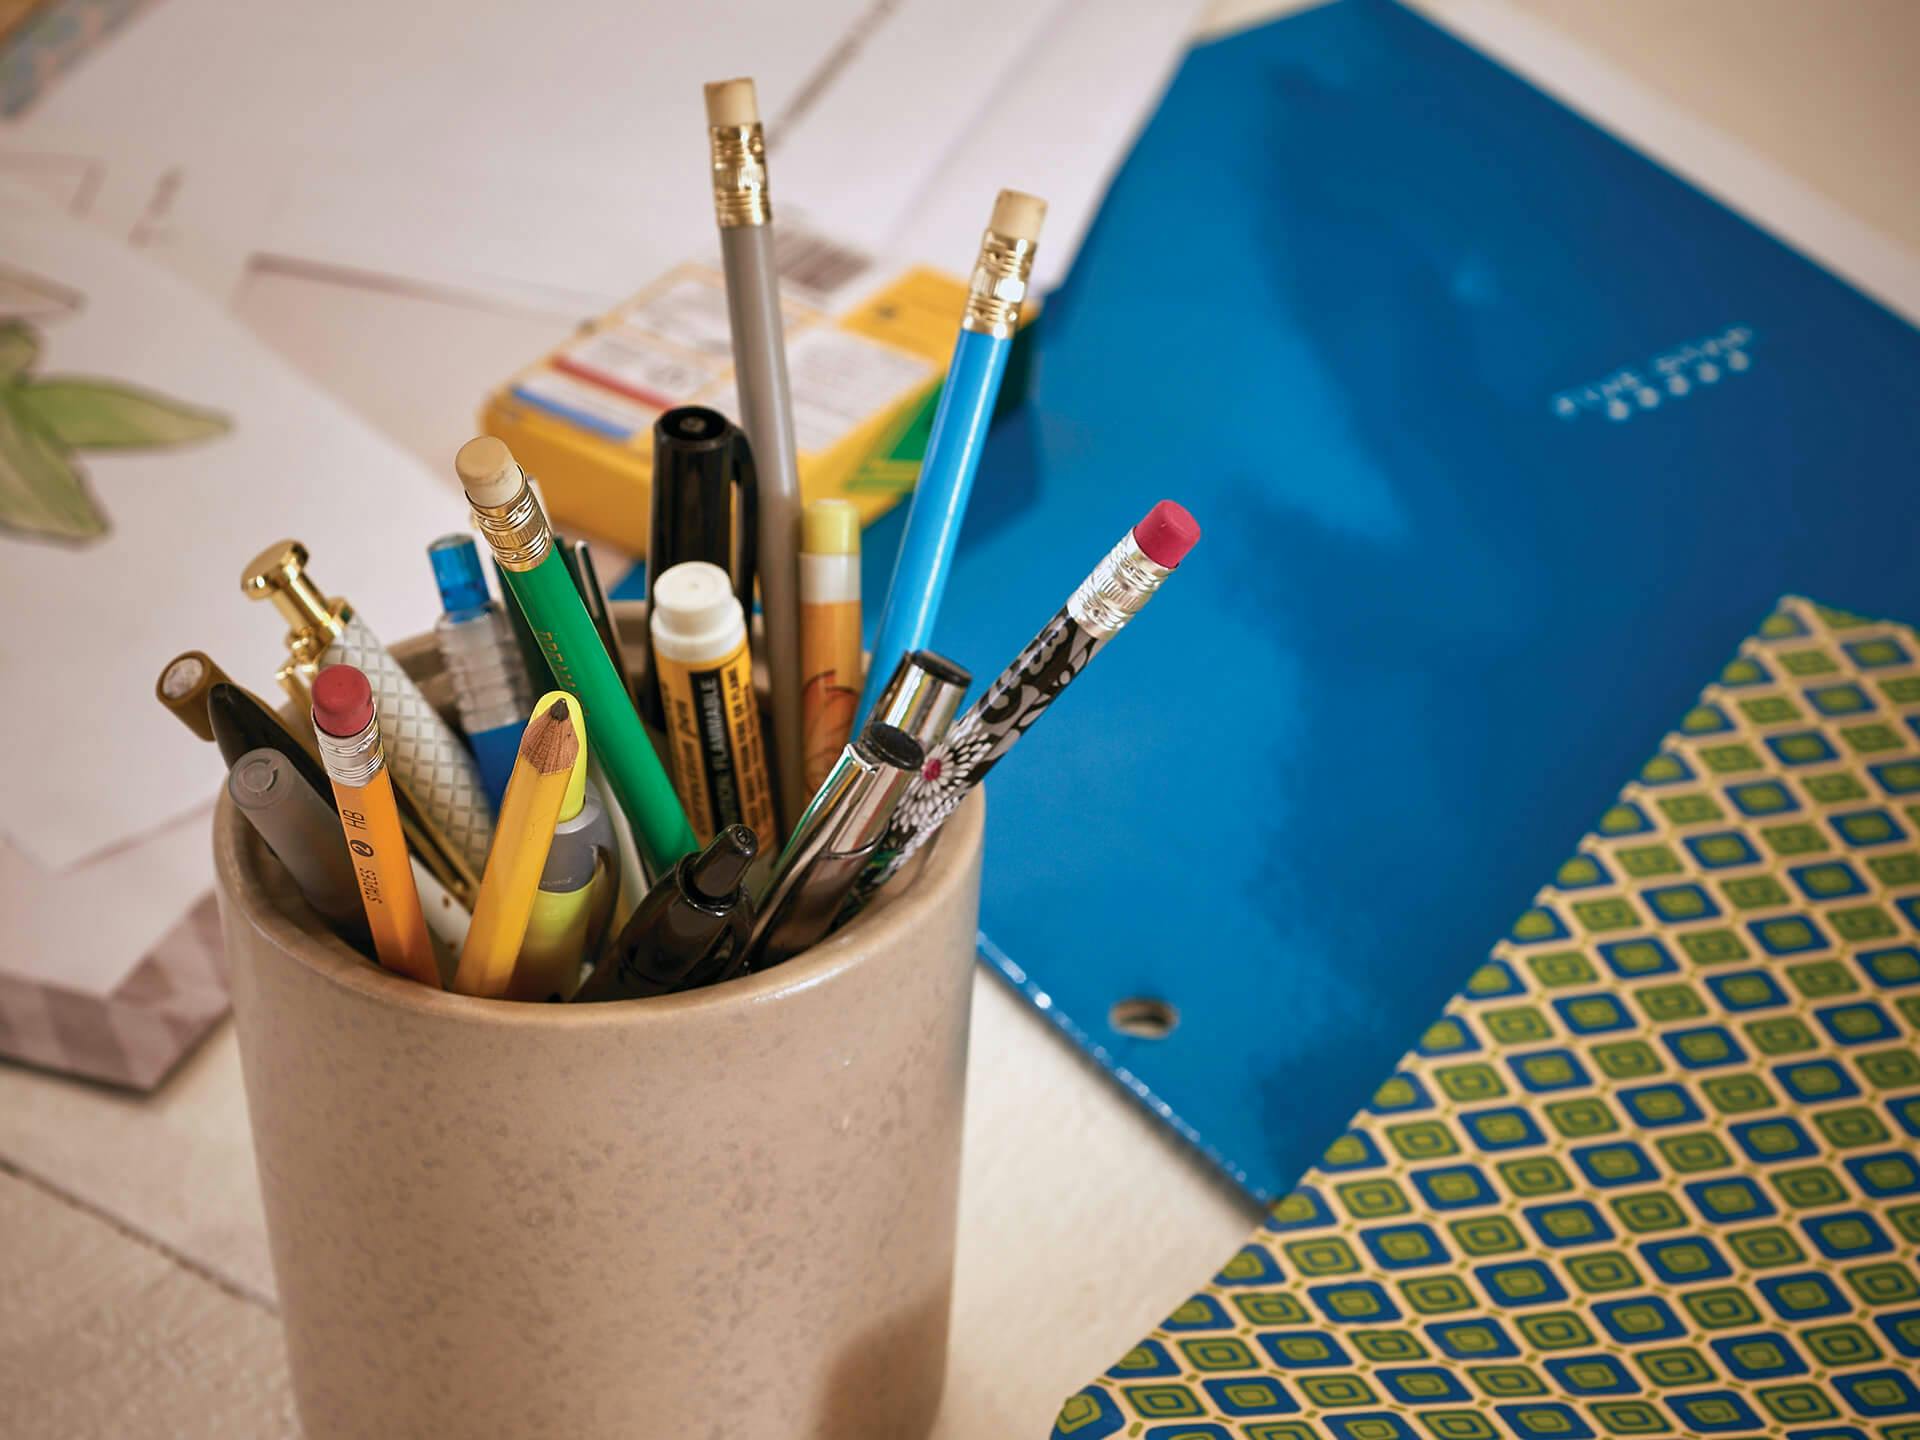 A cup of pencils and two colored folders sit amongst papers on a table